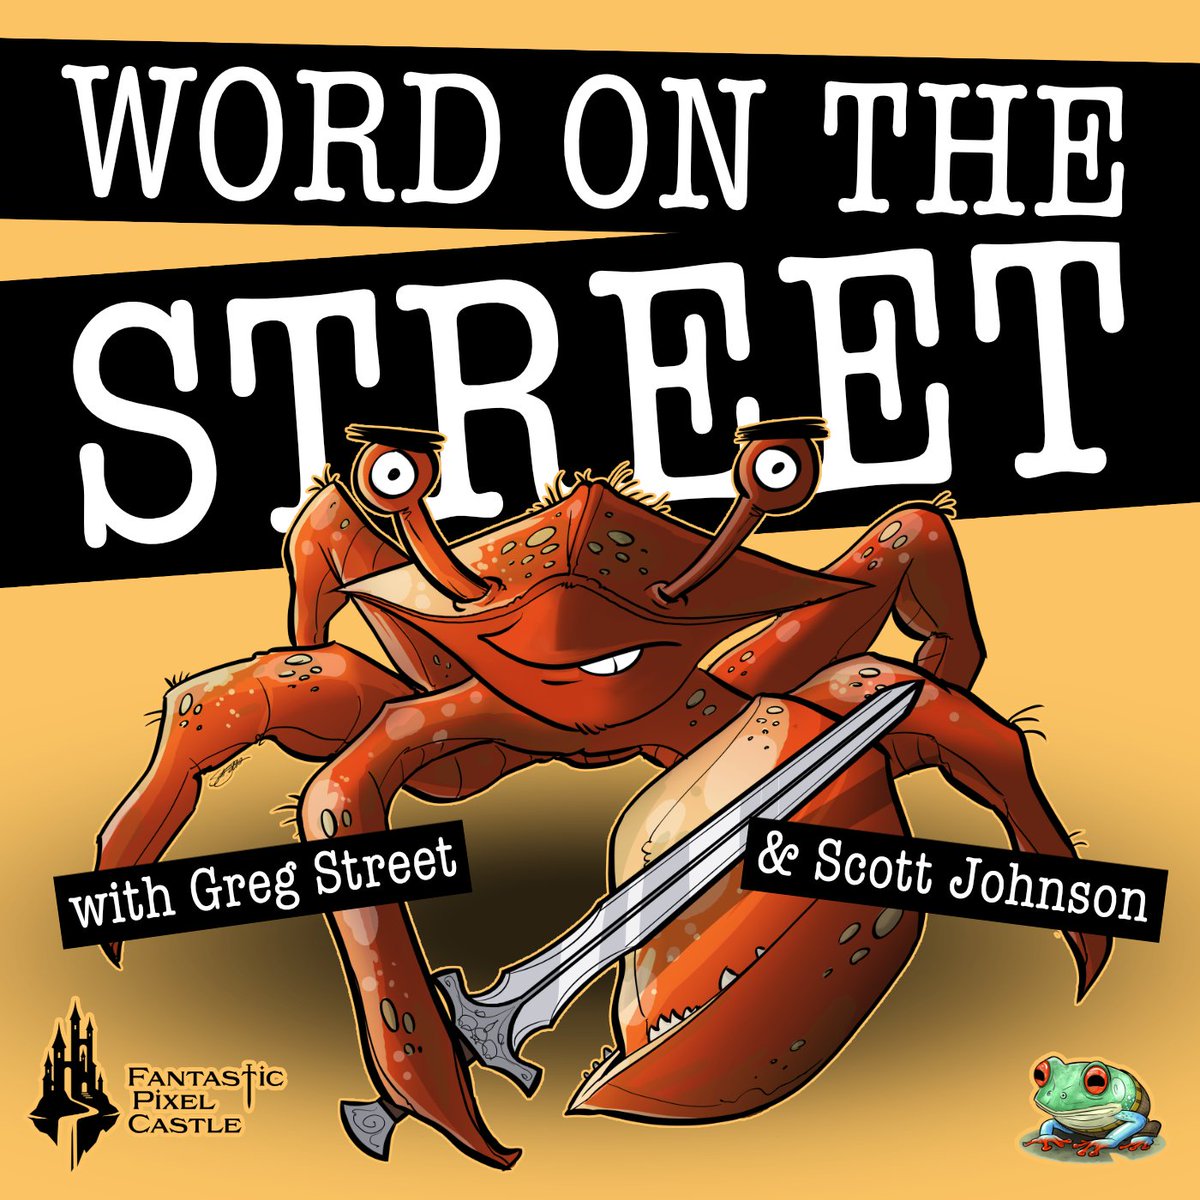 Join us tomorrow for Word on the Street Episode 4, with our Content Design Director @candacerthomas joining the show for a discussion about Ghost's Blue Zones and encounter design! We'll be live at 11am PT on February 13th. Link 👇